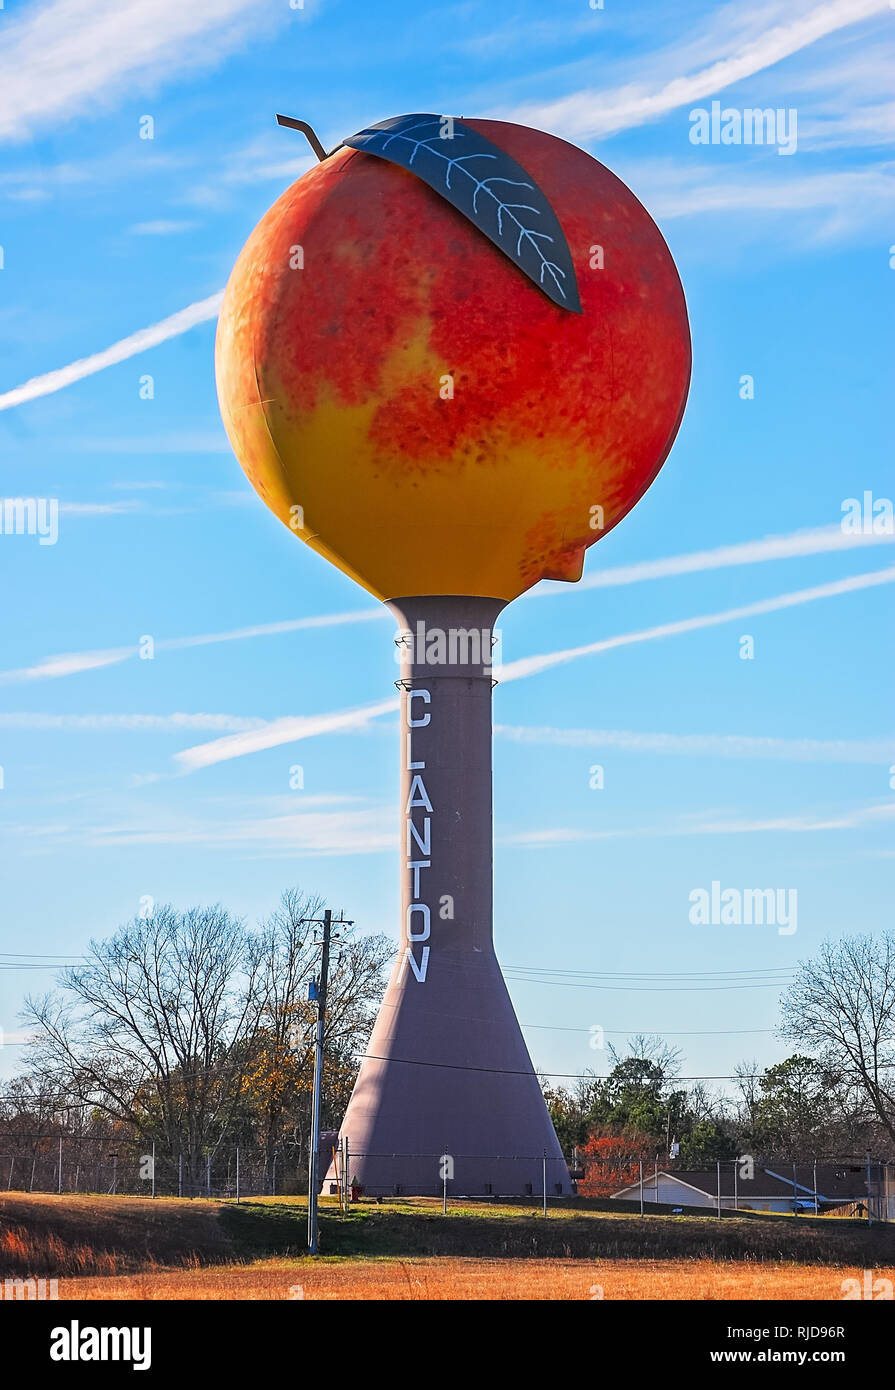 The peach-shaped water tower is pictured, Jan. 3, 2011, in Clanton, Alabama. Clanton, located in Chilton County, is known for its peaches. Stock Photo